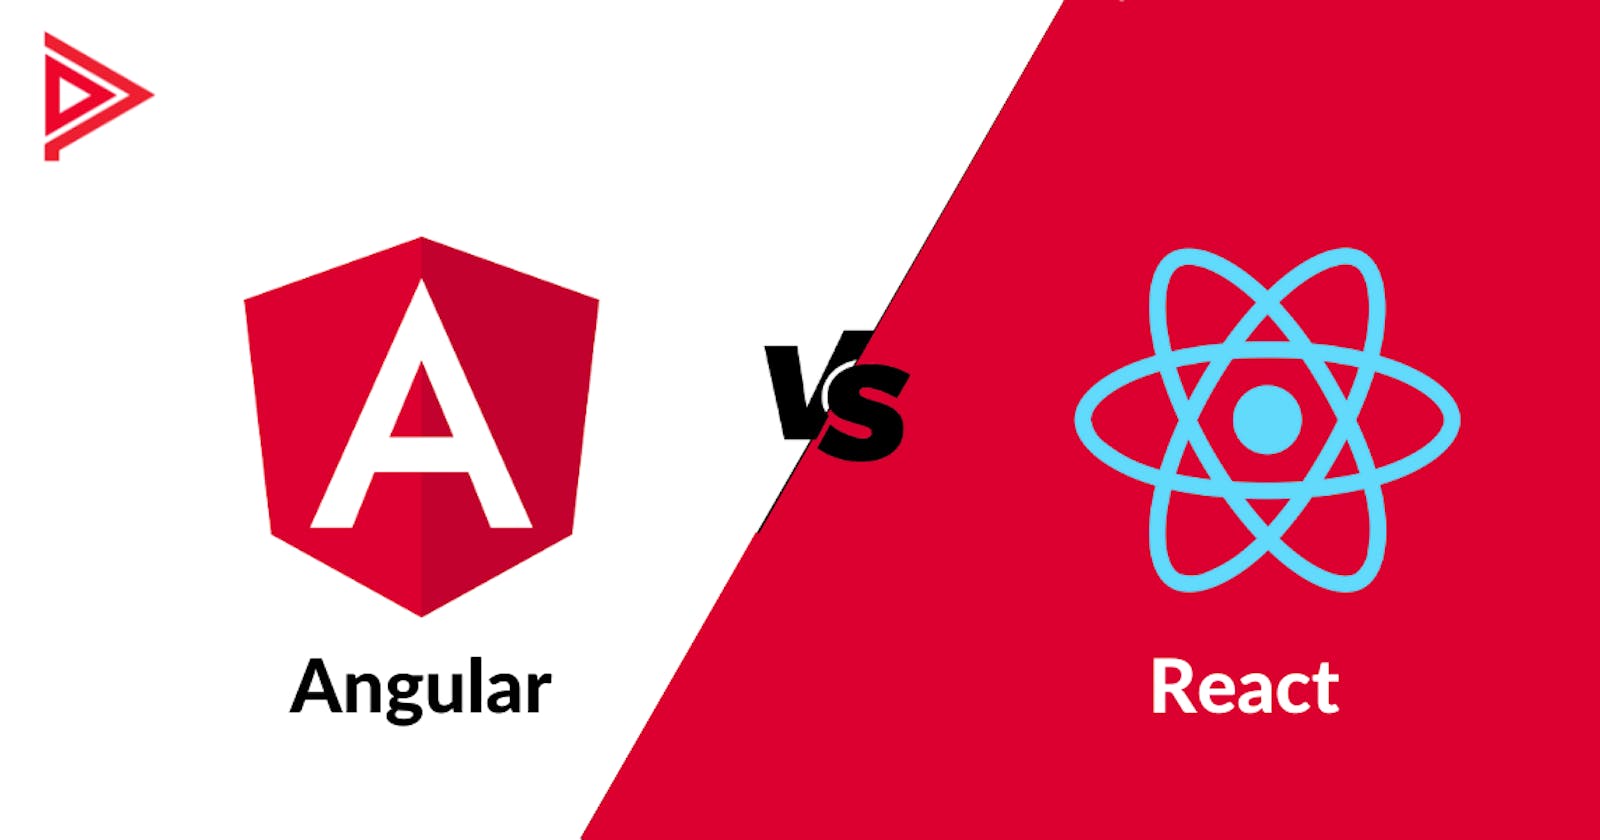 Angular vs React: Which is Better for Web Development?